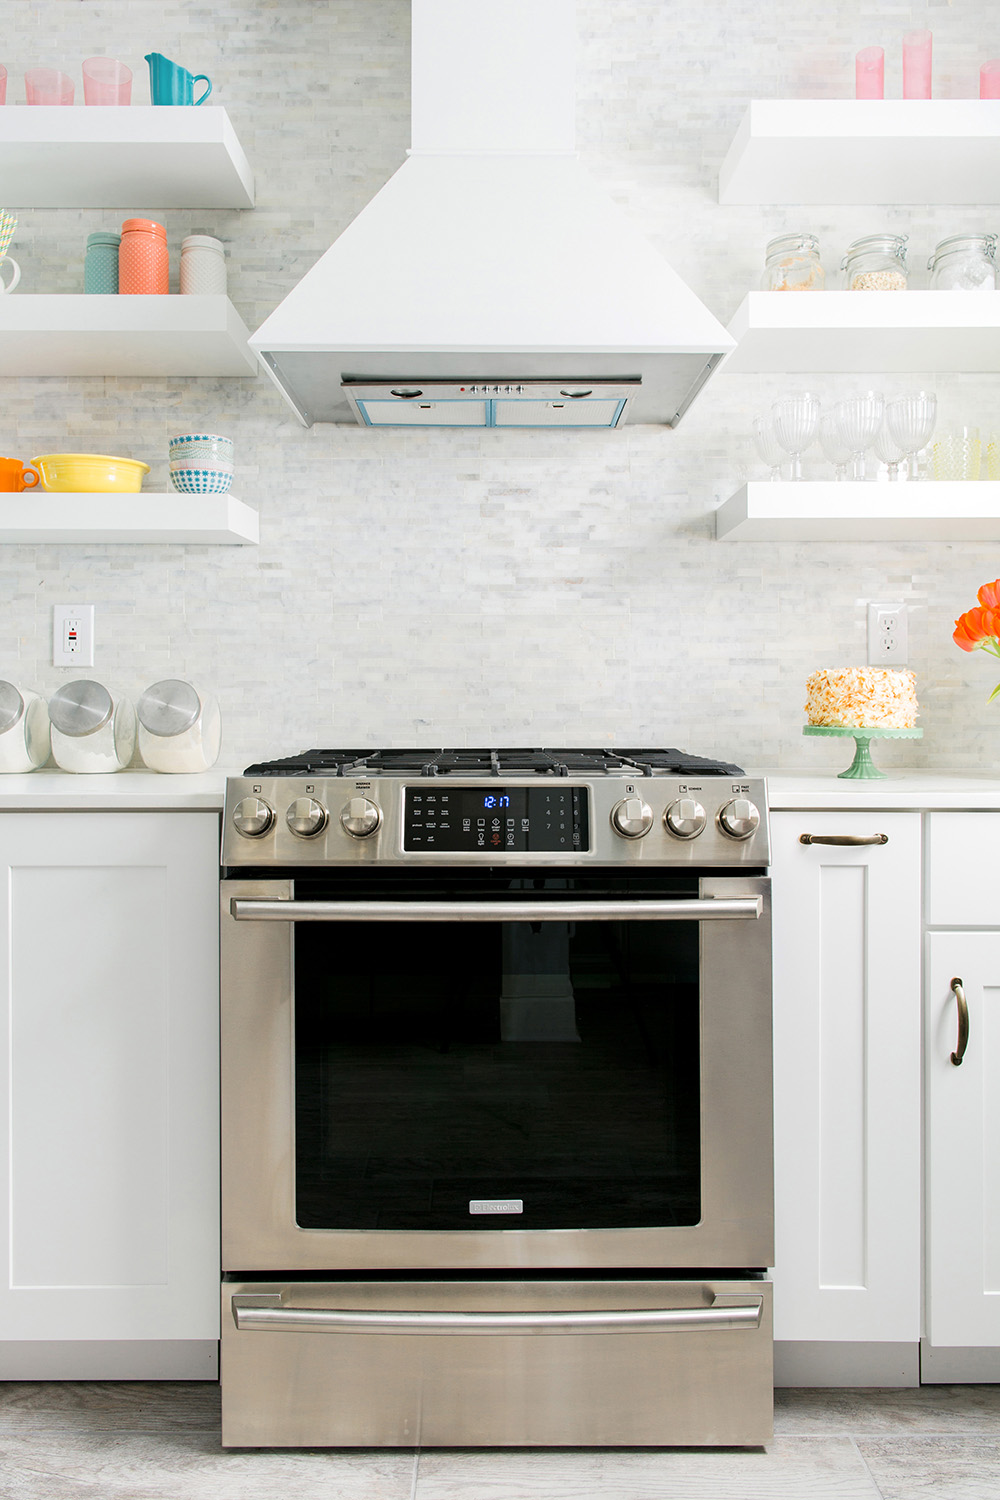 A silver kitchen oven with a white vent hood and white shelving on the wall.